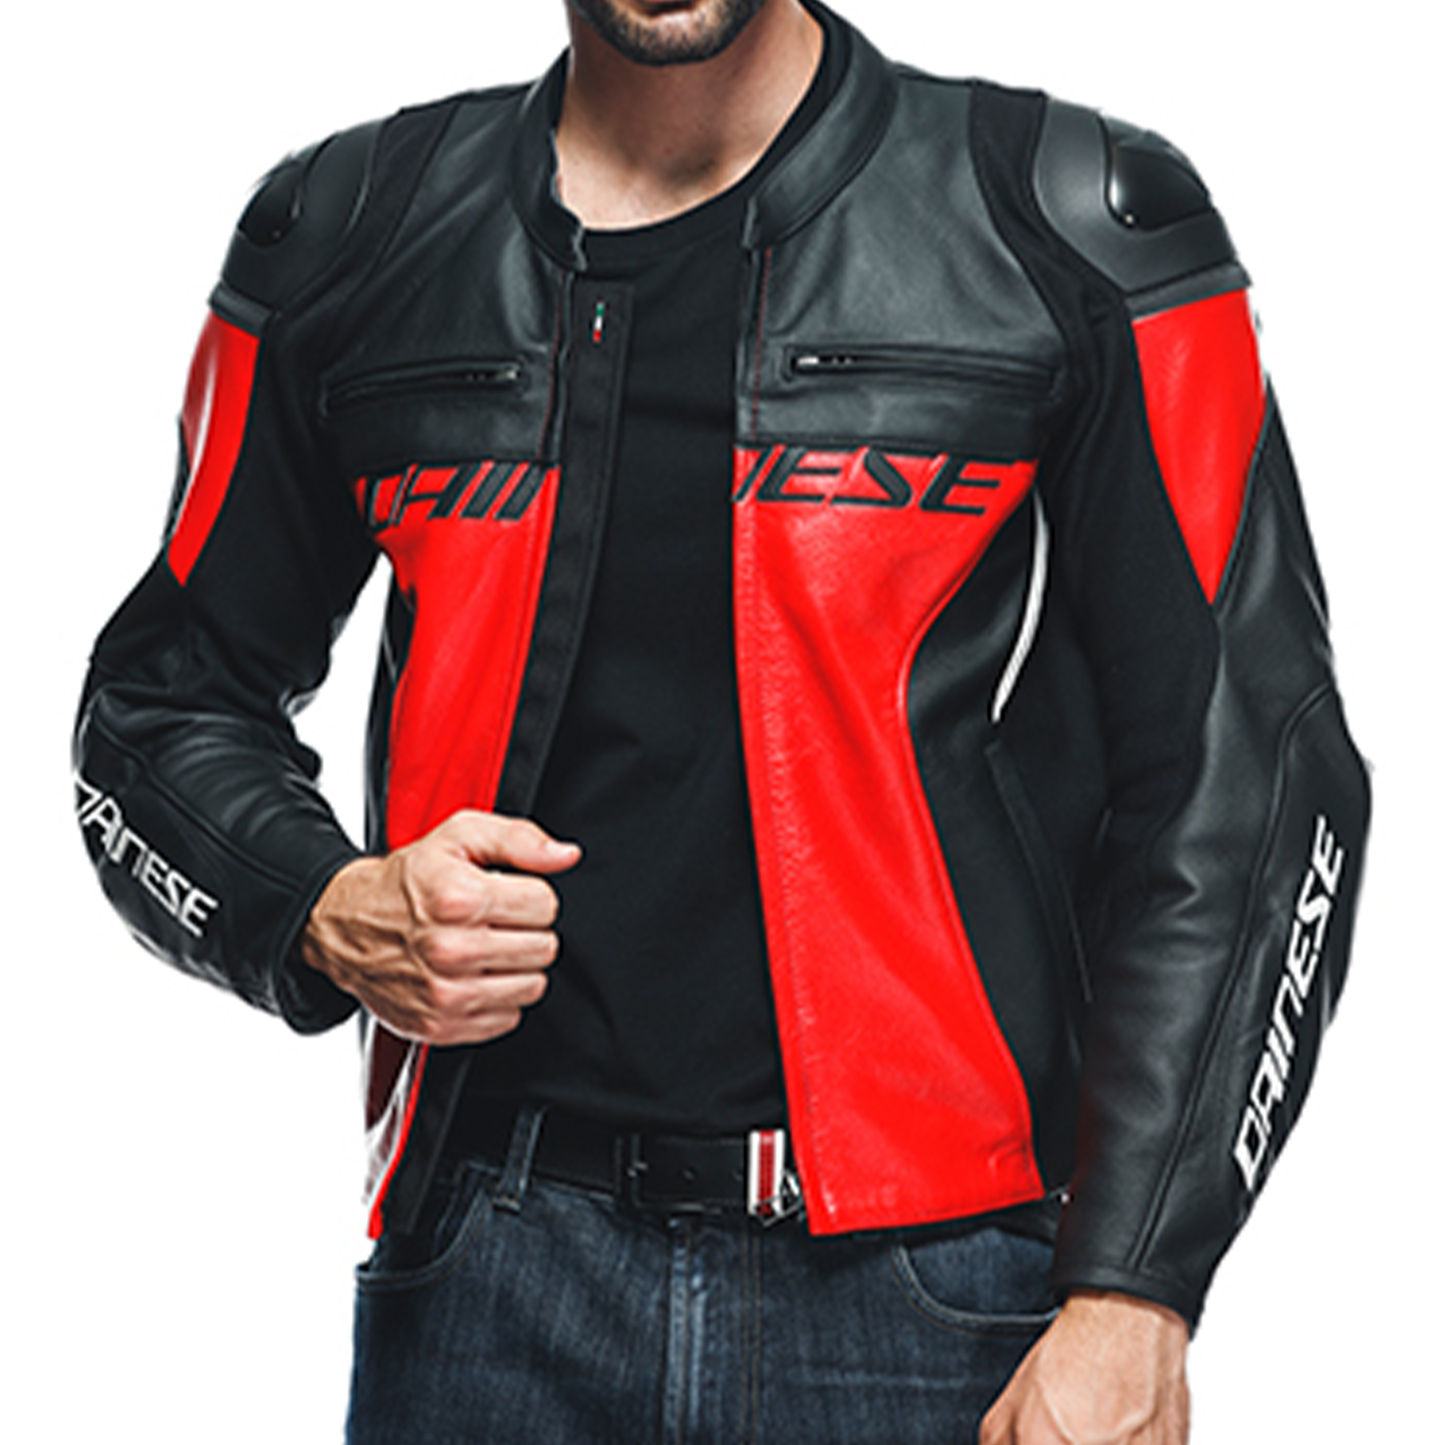 Dainese Racing 4 Leather Jacket - Lava Red/Black